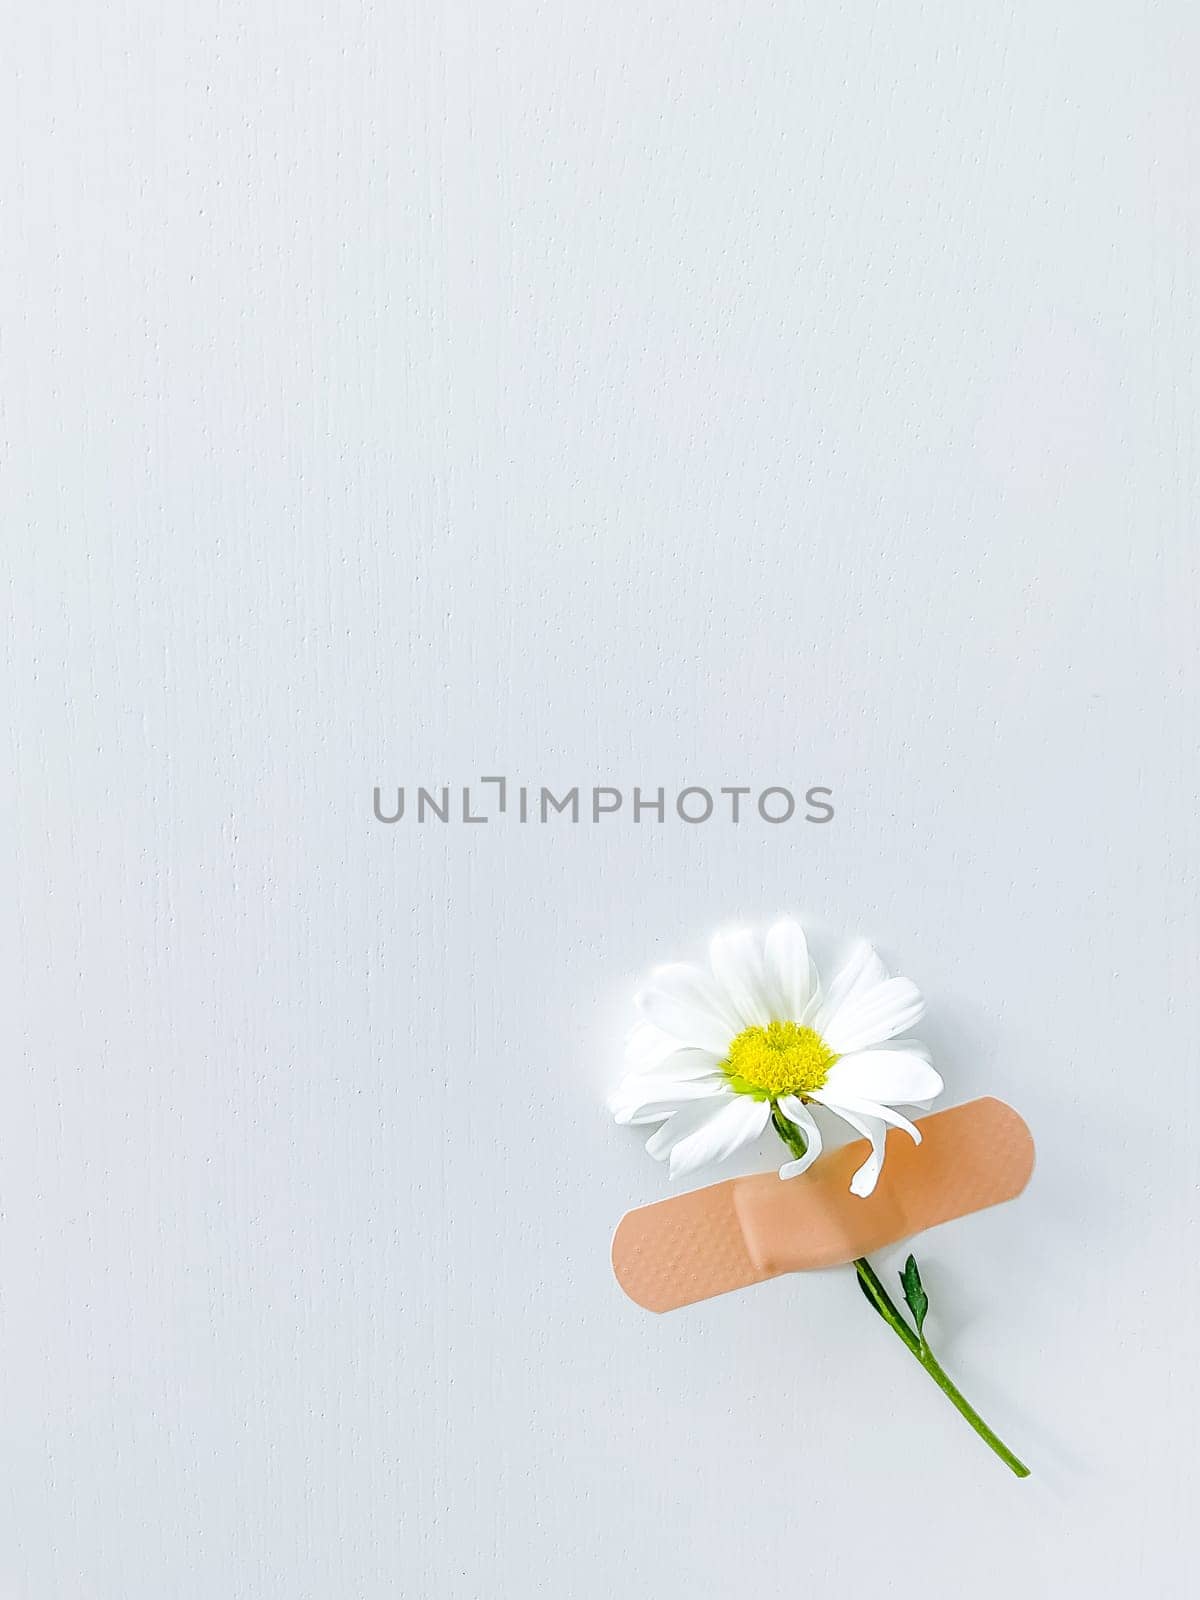 Beautiful chamomile flower with band-aid on a white background. with empty space for inscription or text